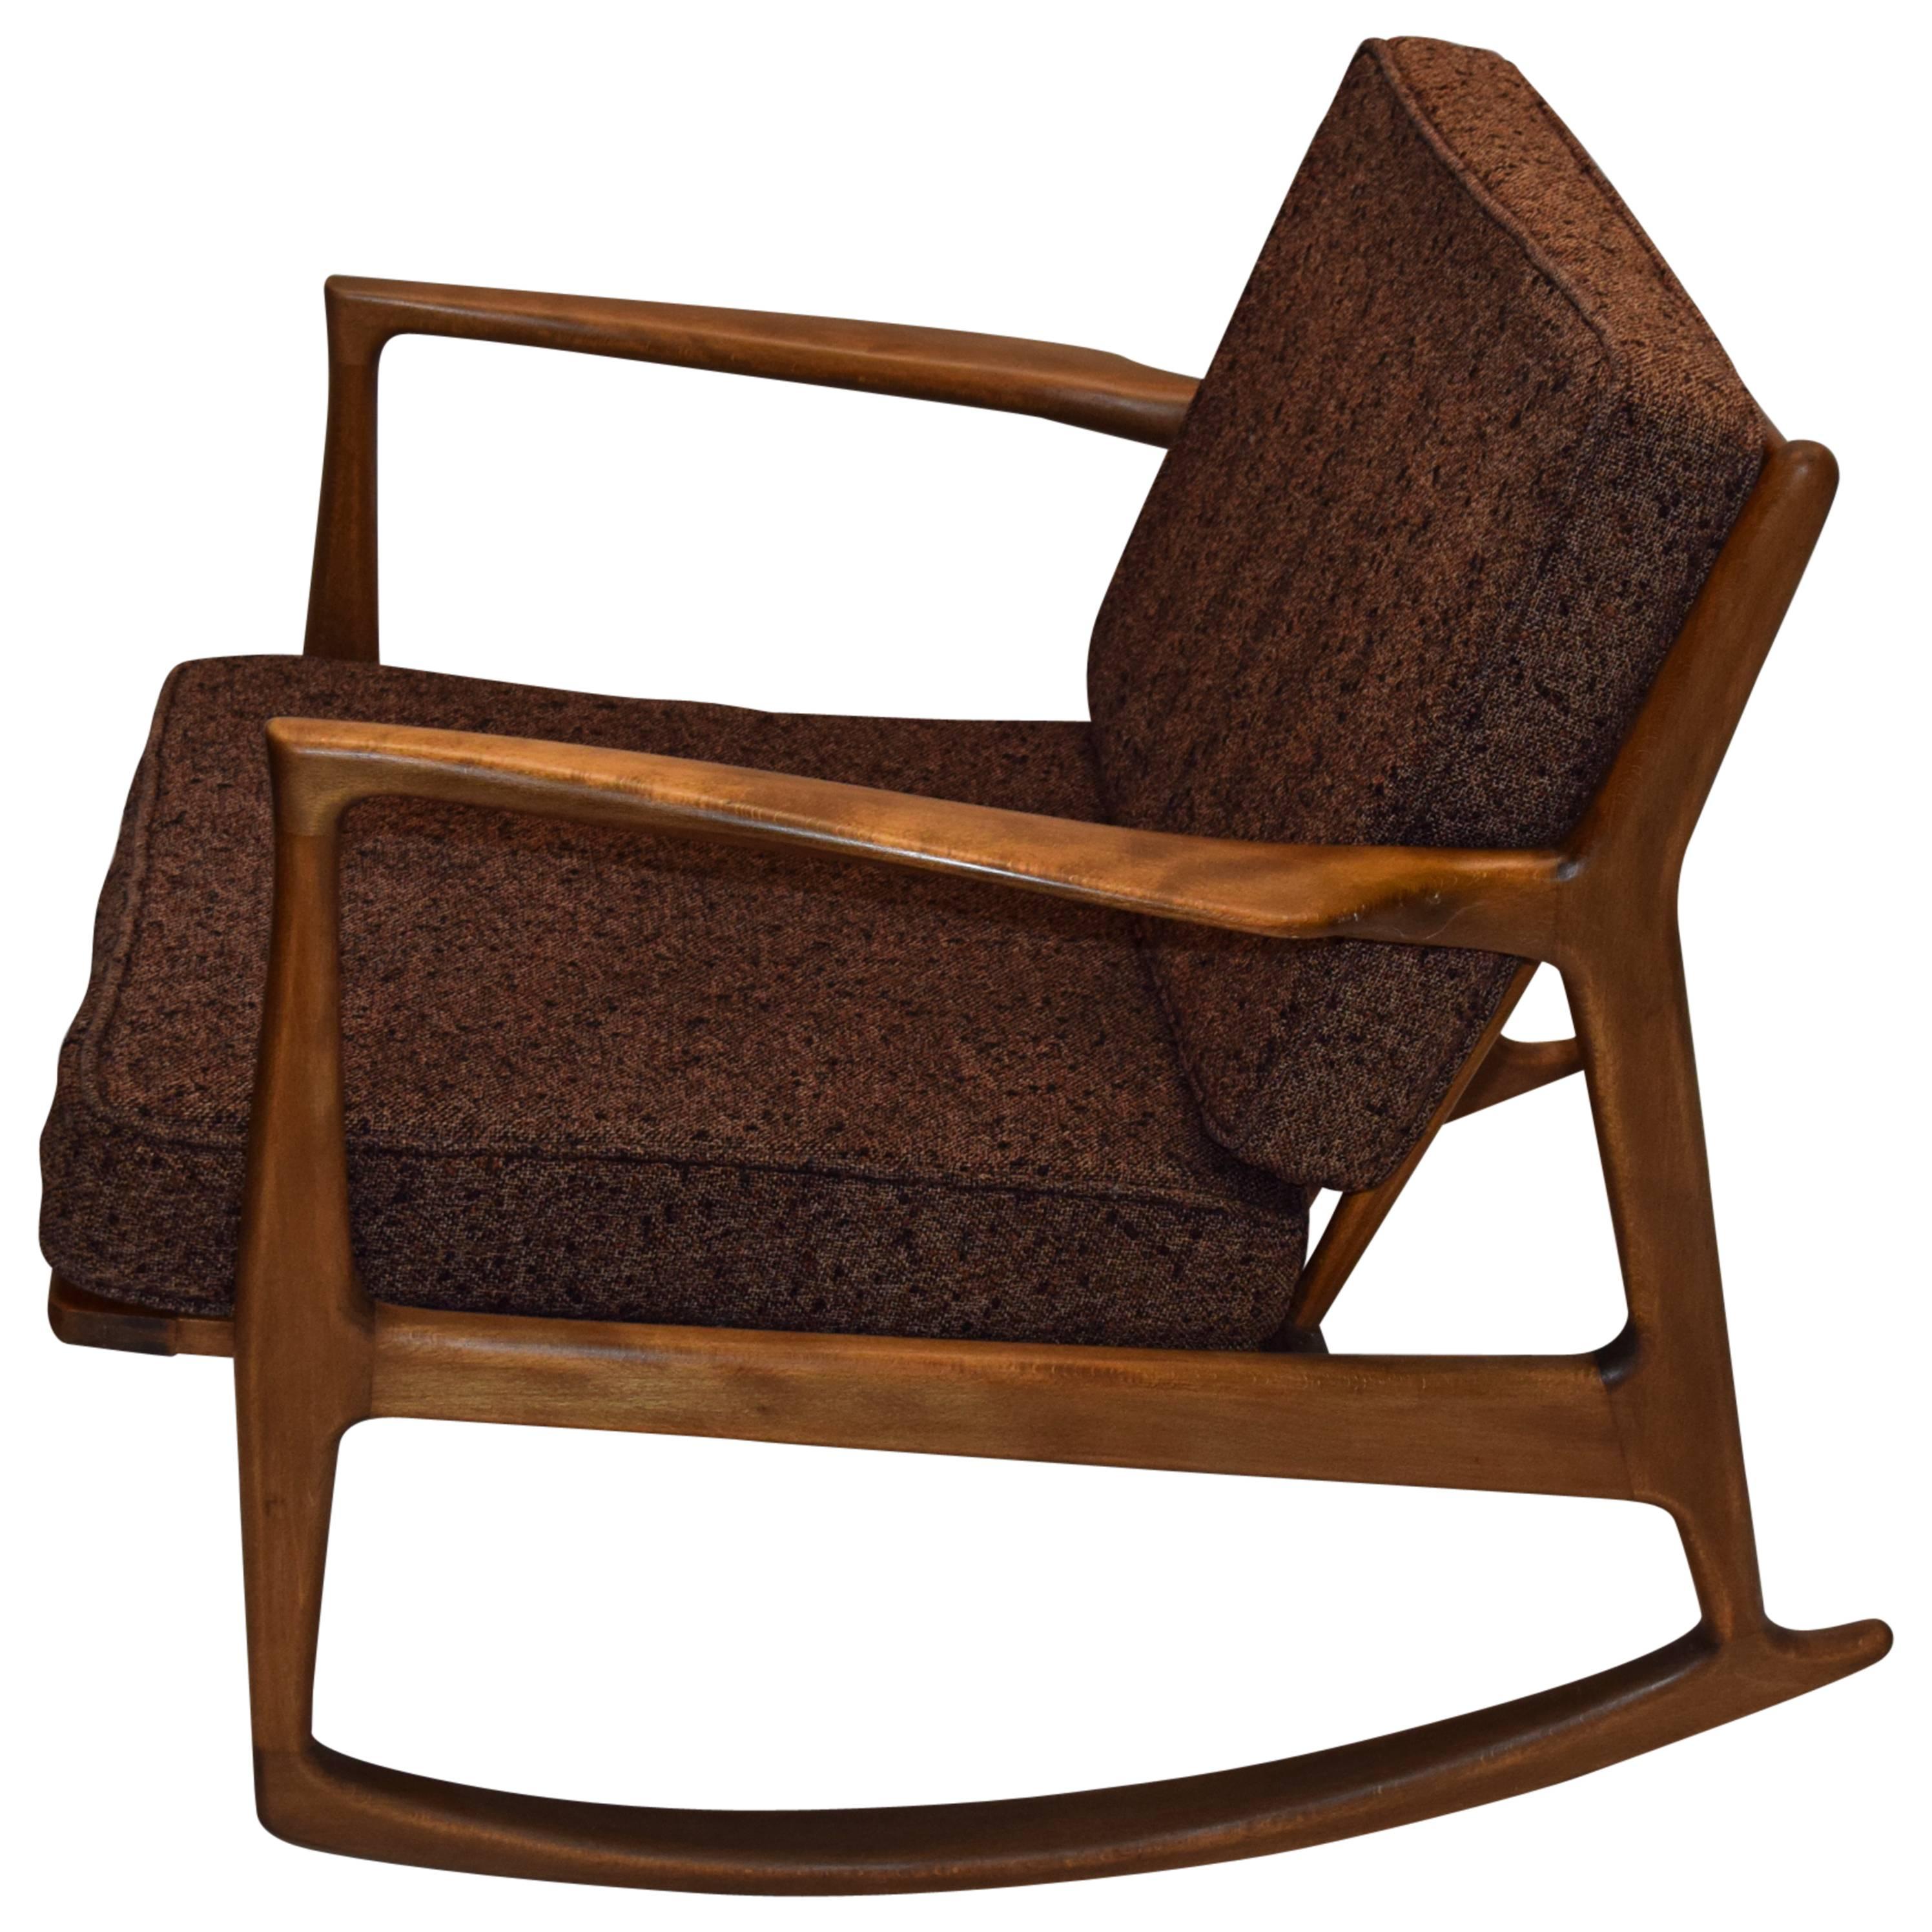 Single Rocking Chair by Ib Kofod-Larson for Selig, circa 1955 Made in Denmark